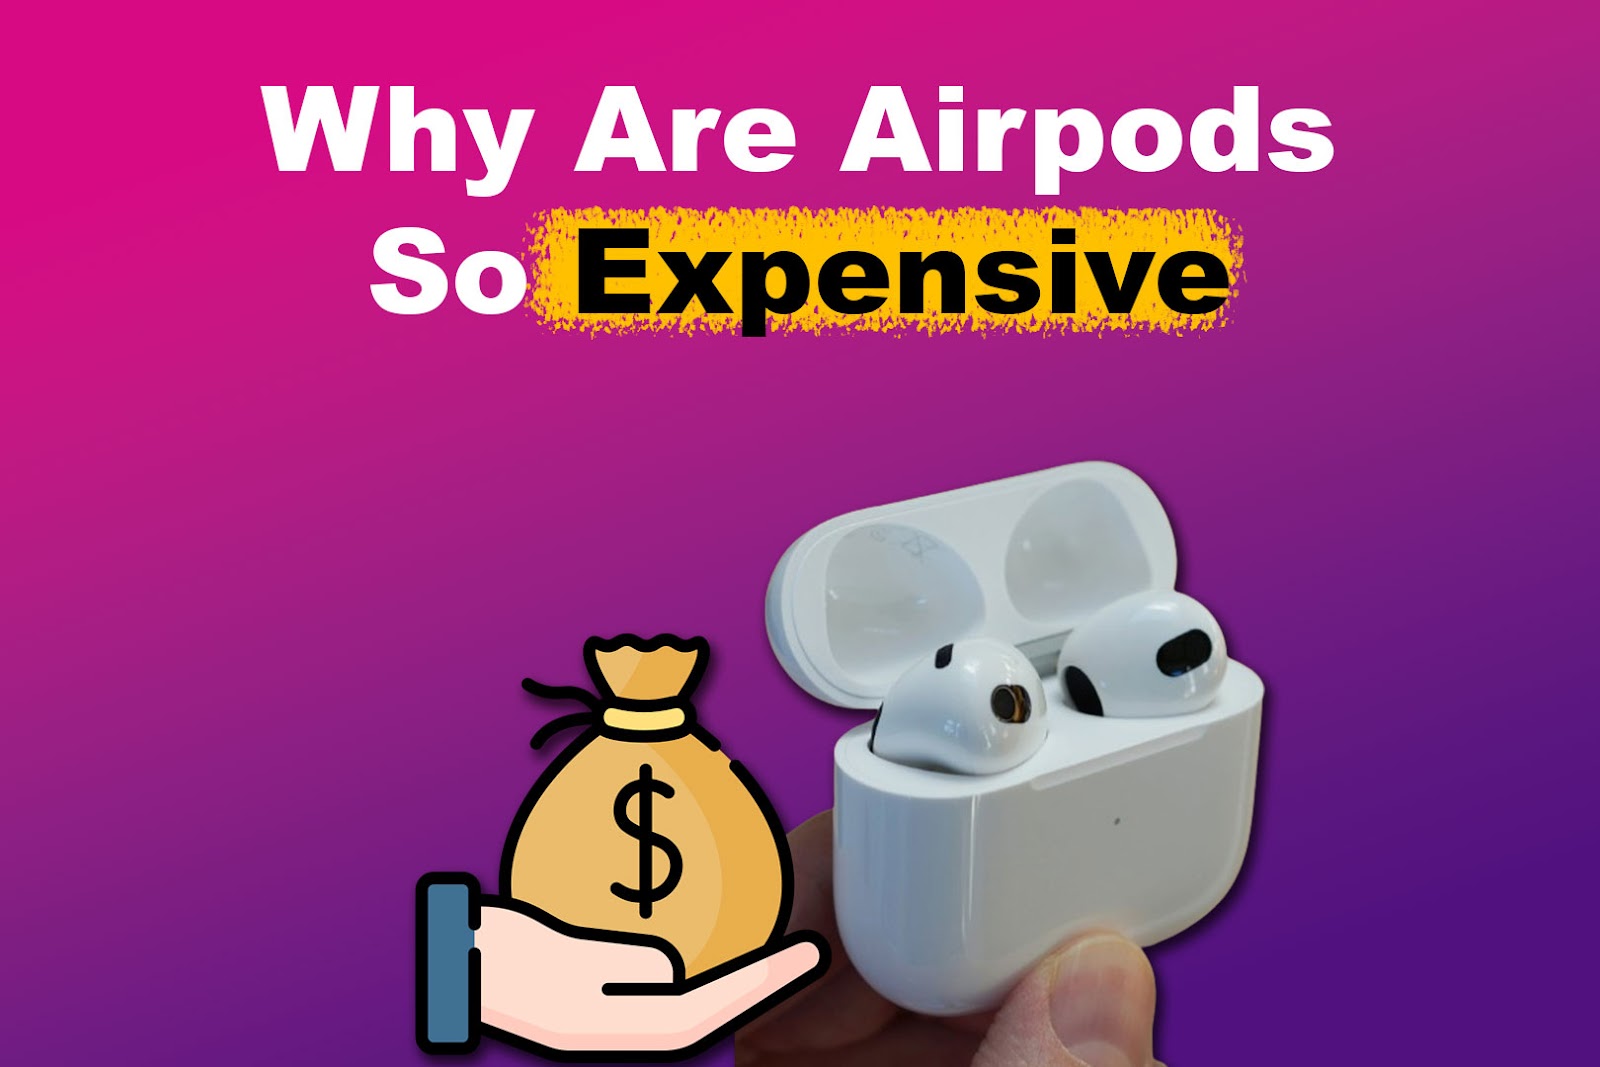 Why Are Airpods So Expensive